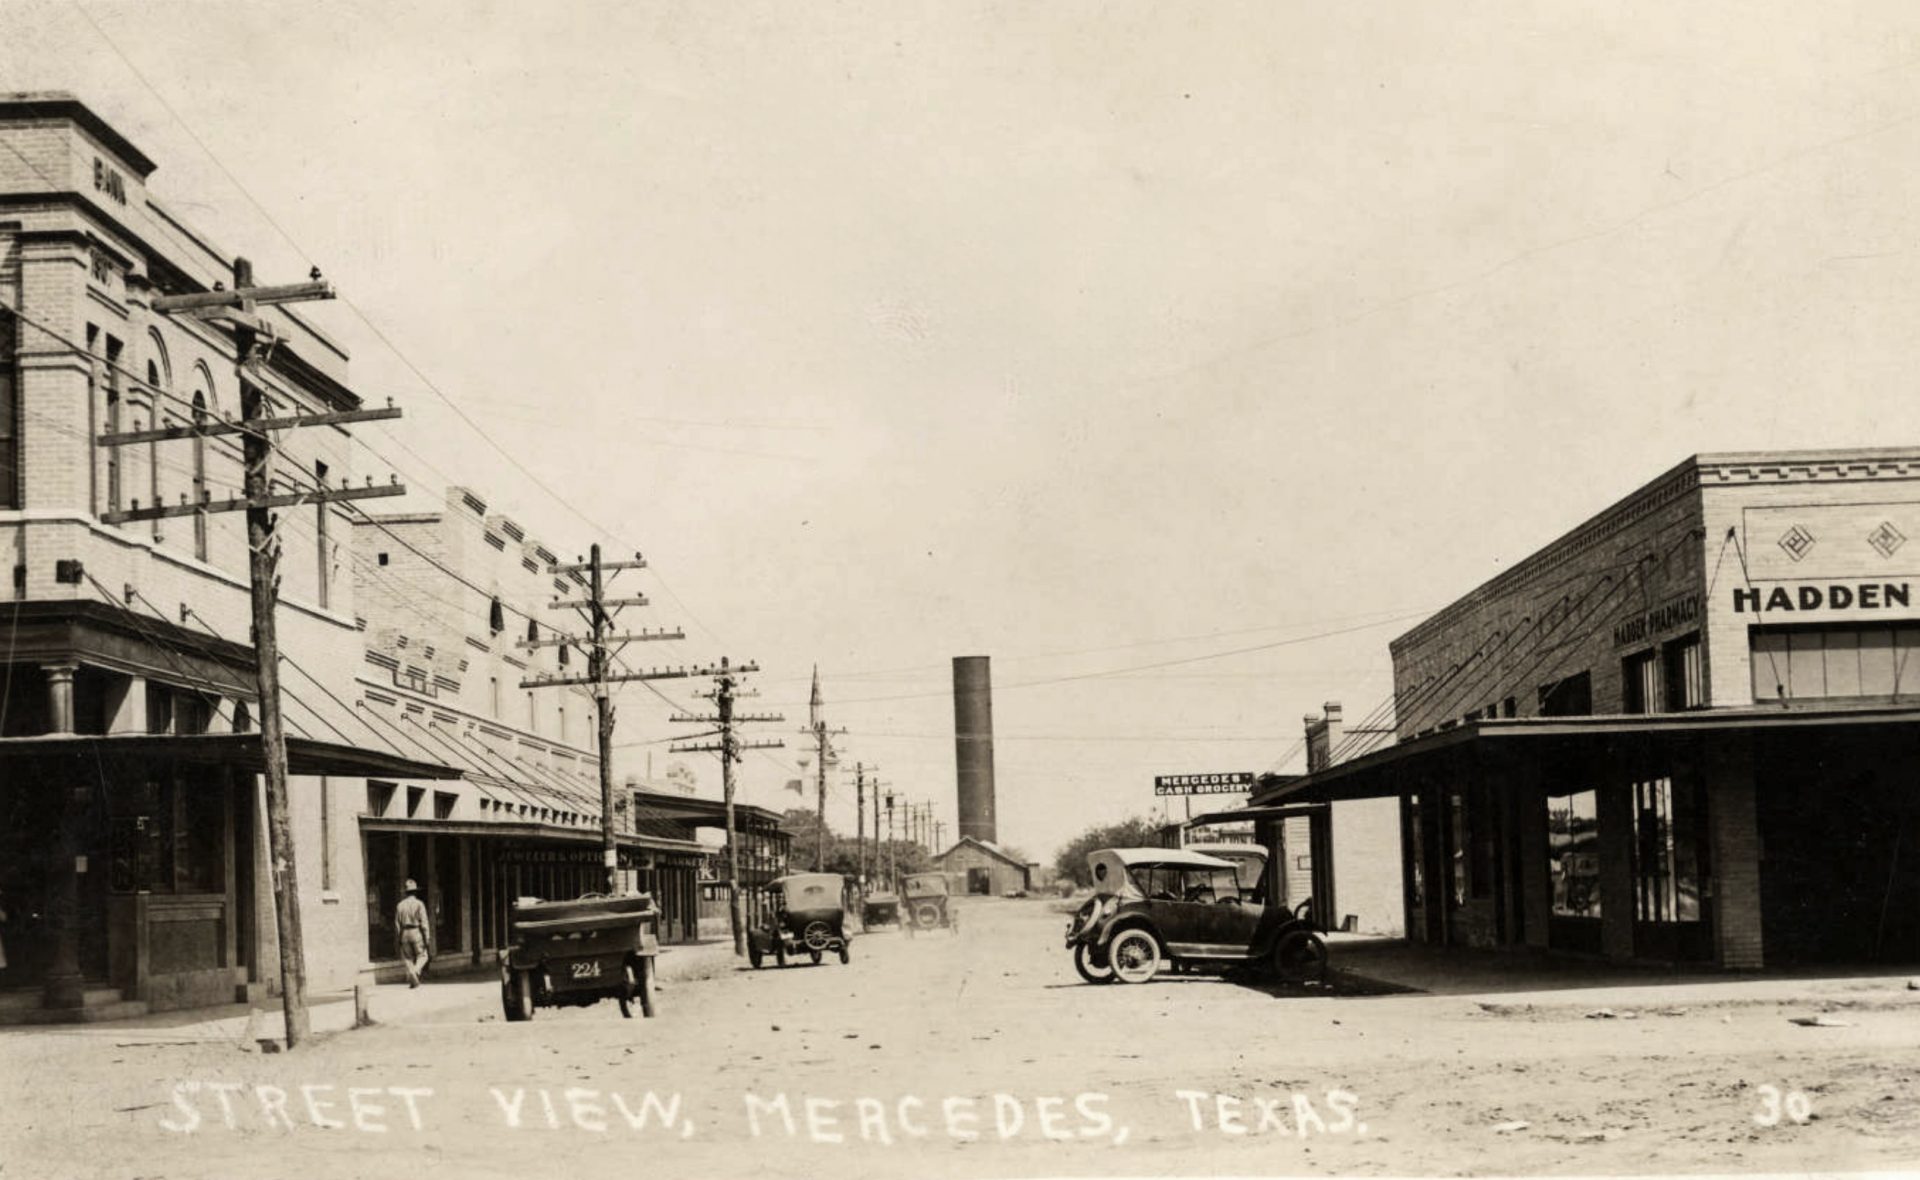 A black and white photograph of a street view in Mercedes, Texas, taken from the middle of the road. The street is lined with two-story buildings, some with signs or awnings. Cars are parked on the side of the road. A tall smokestack is visible in the background. The photograph has a caption that reads “Street View, Mercedes, Texas”.